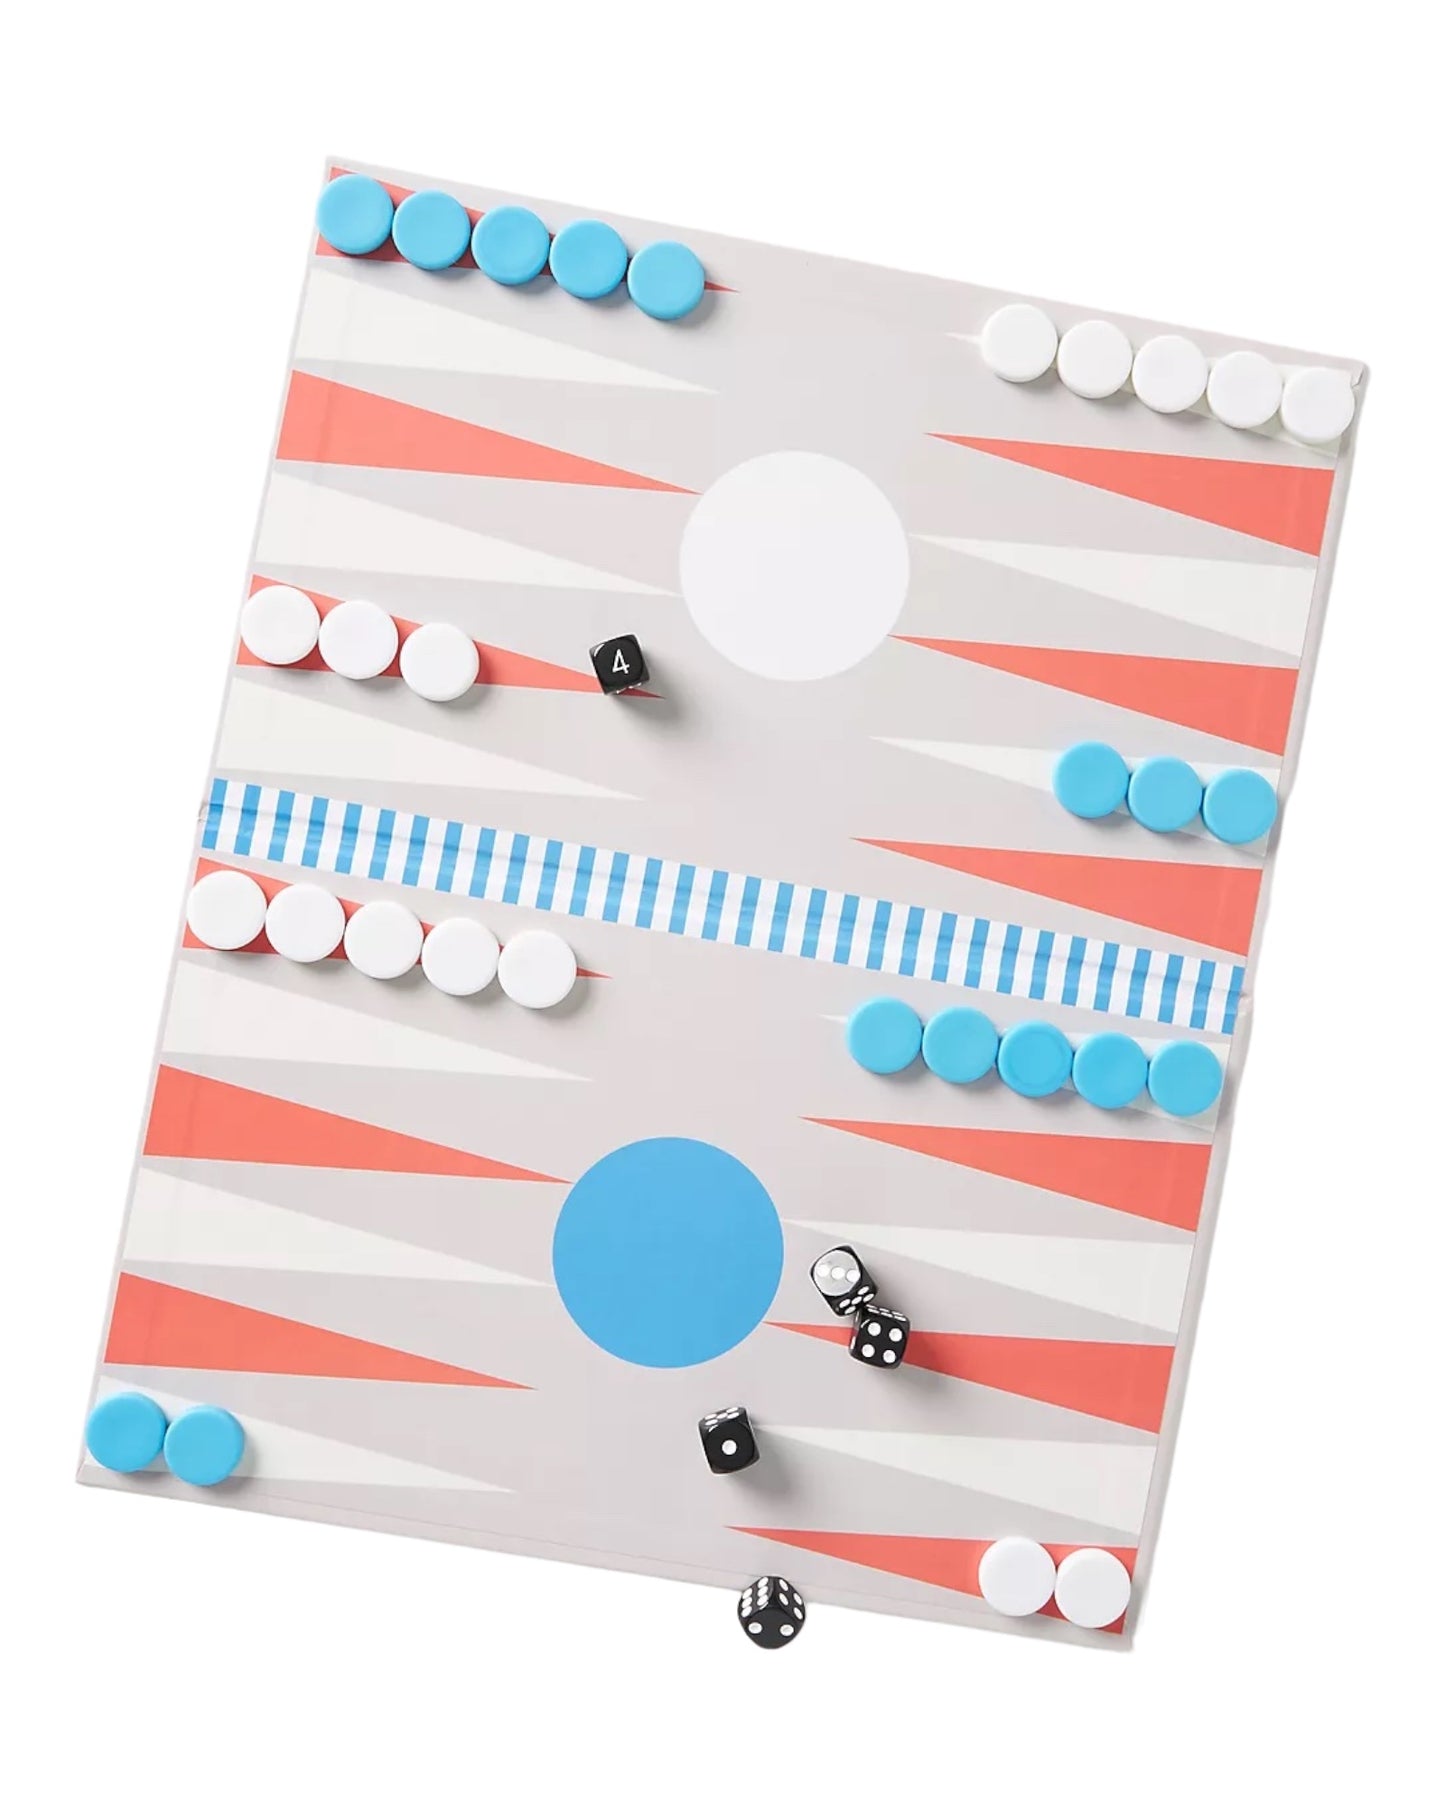 Art of Play Backgammon Set by Printworks